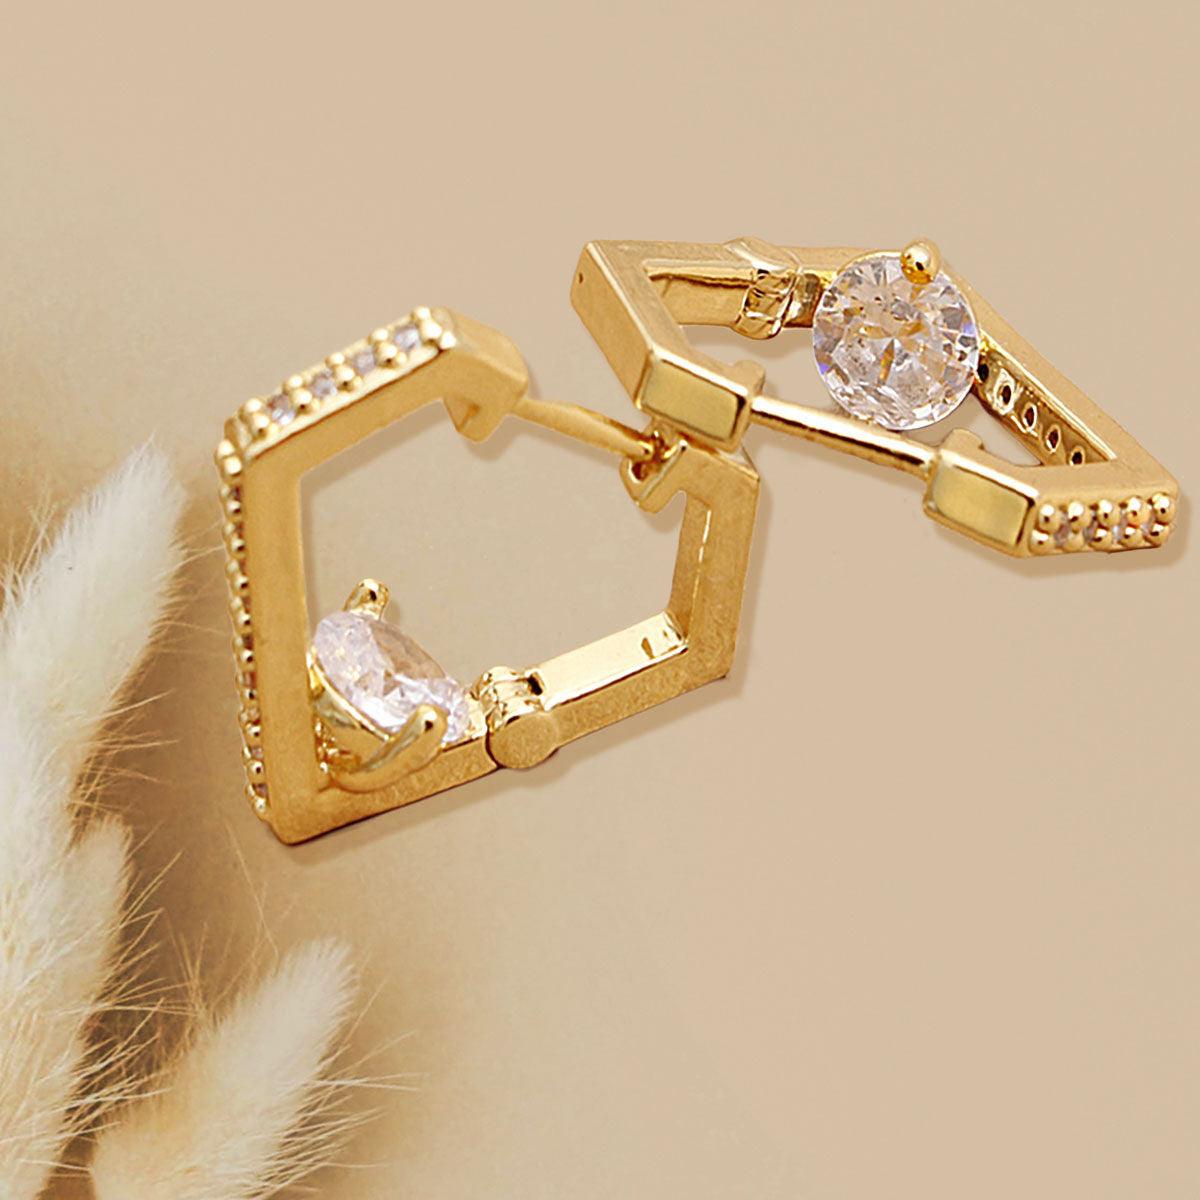 Shine in Style: Stunning CZ Diamond Design Huggie Hoops with Gold Finish